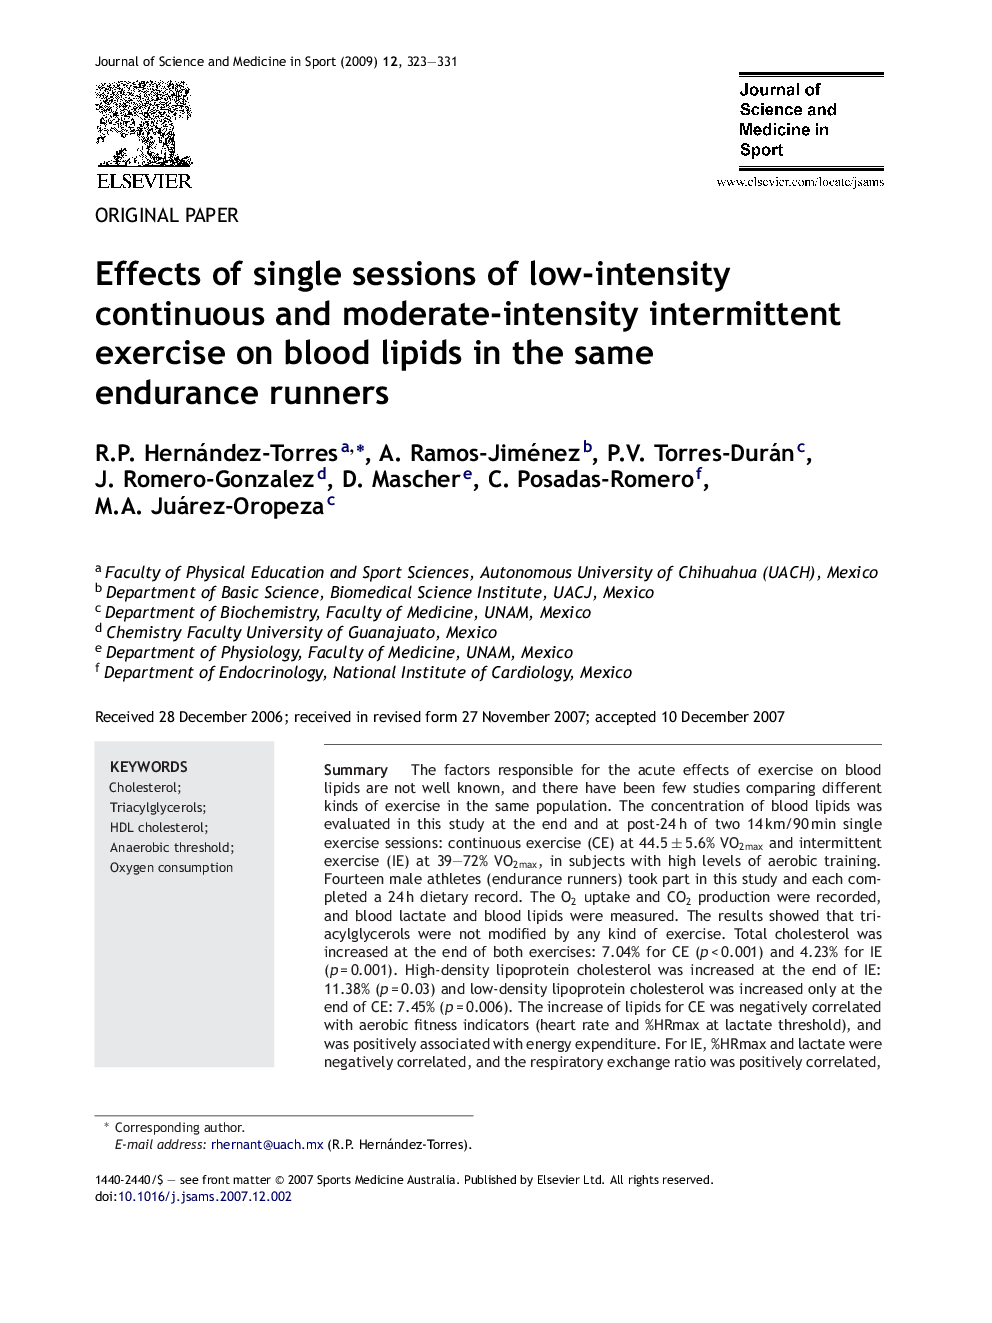 Effects of single sessions of low-intensity continuous and moderate-intensity intermittent exercise on blood lipids in the same endurance runners